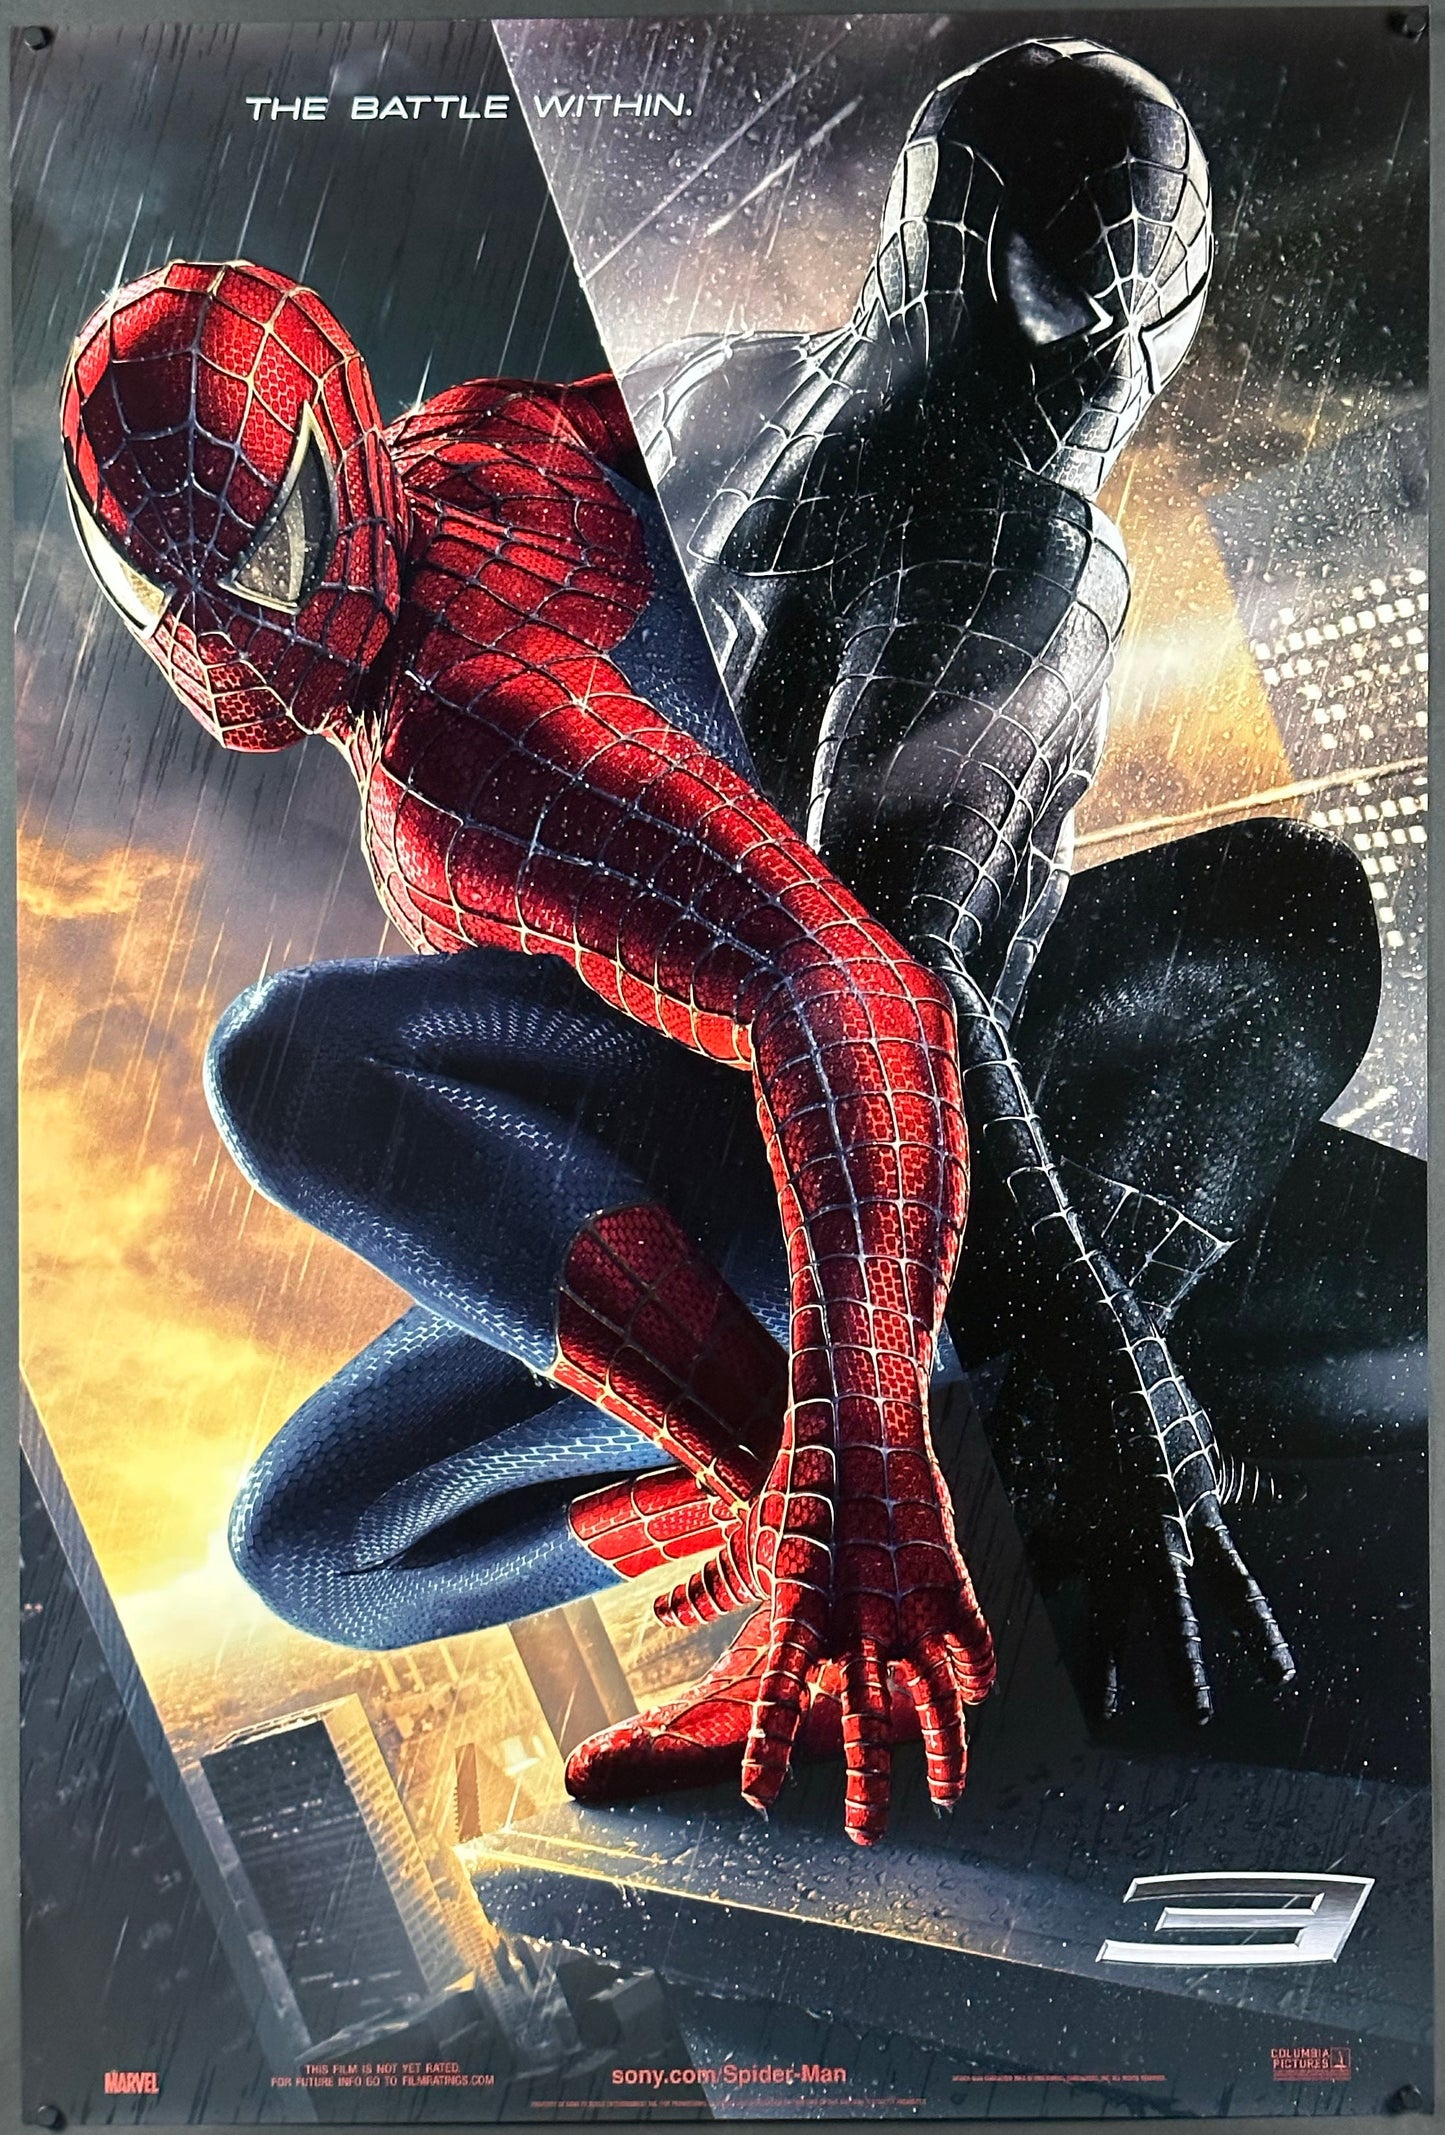 Spider-Man 3 US One Sheet Teaser Style (2007) - ORIGINAL RELEASE - posterpalace.com